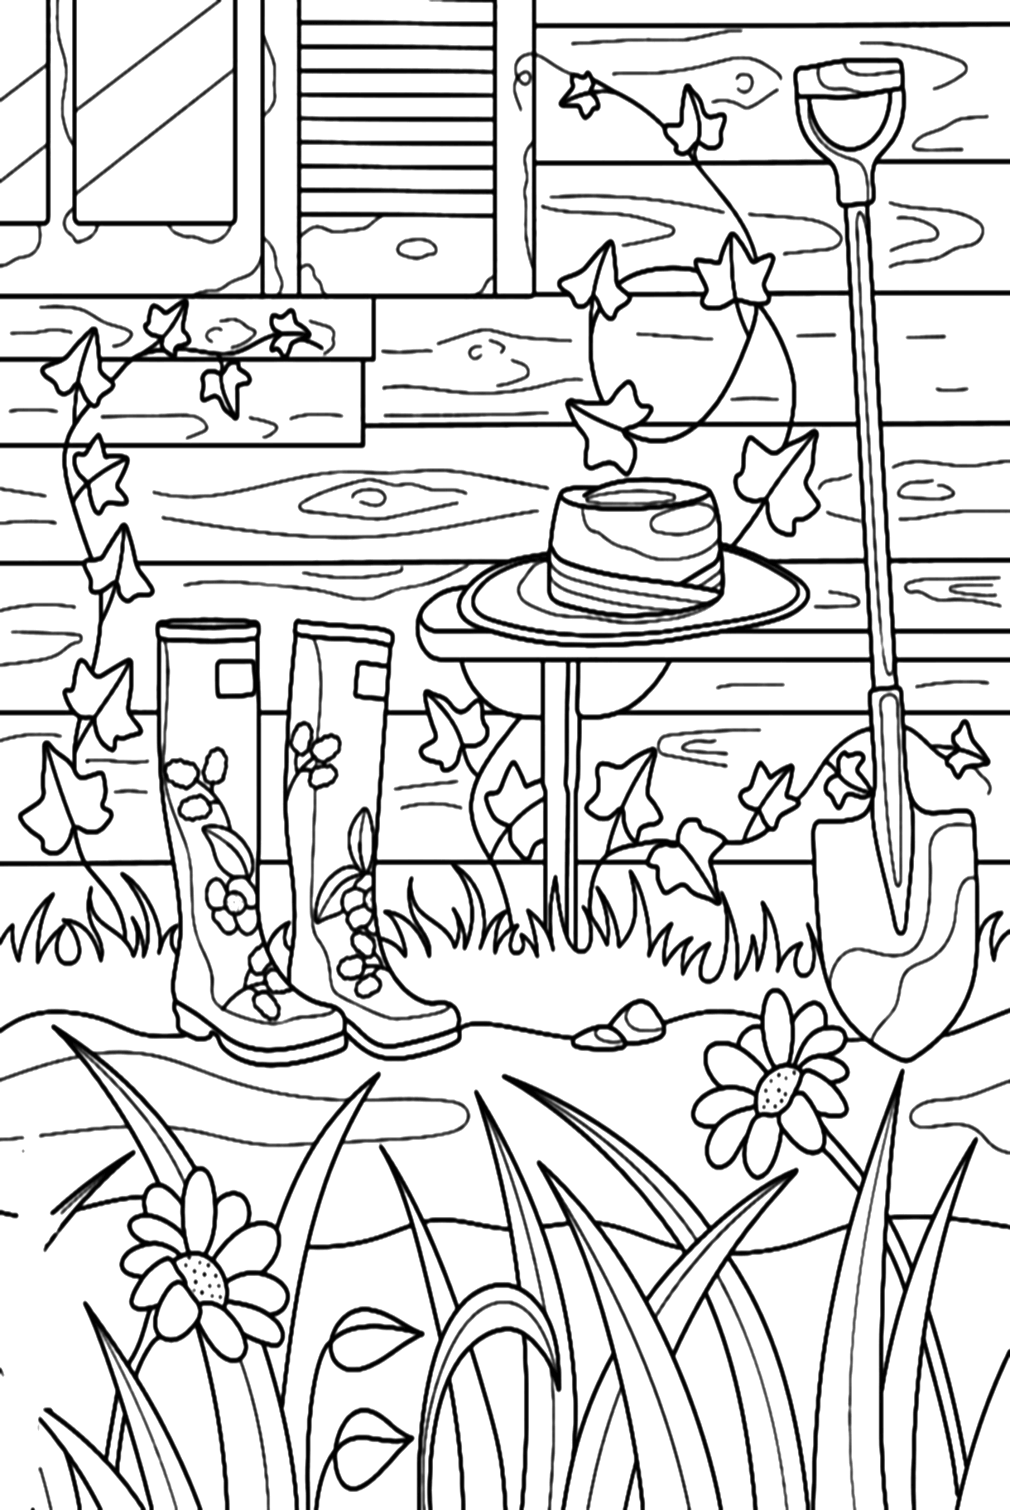 Coloring Pages Boots from Boots